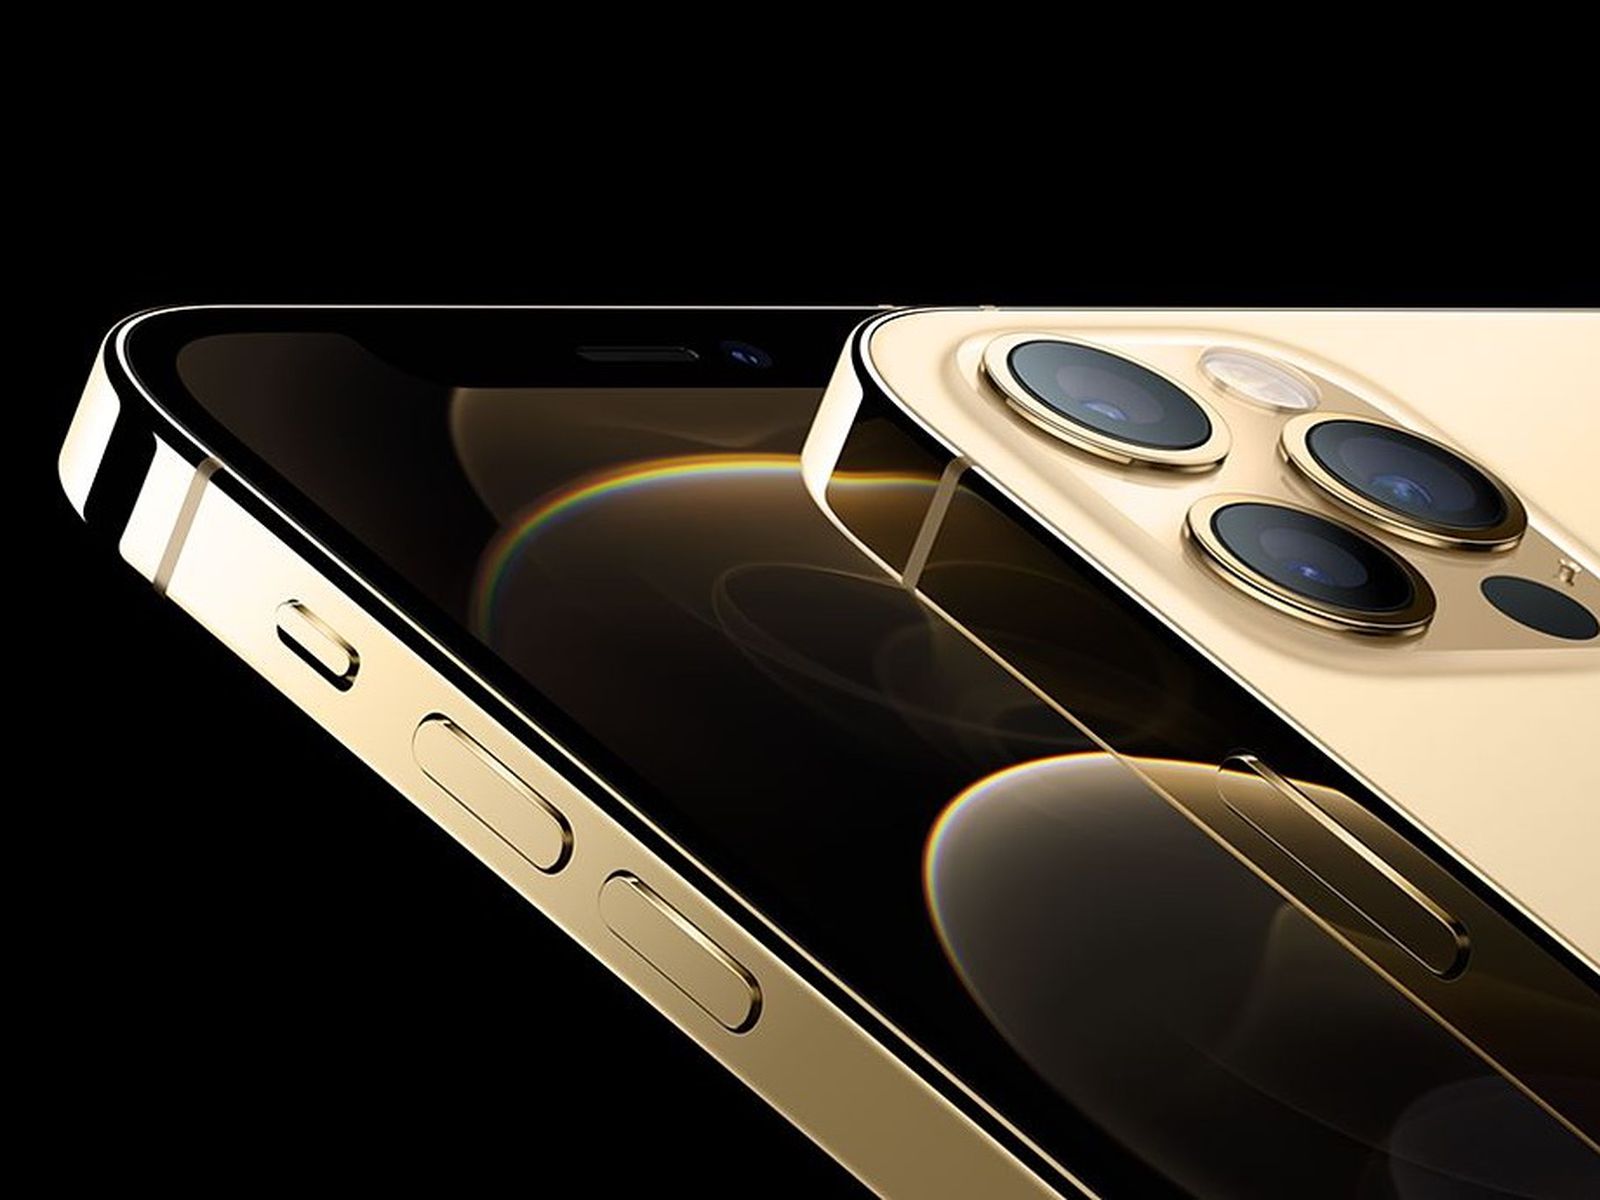 iphone 12 colors pro gold